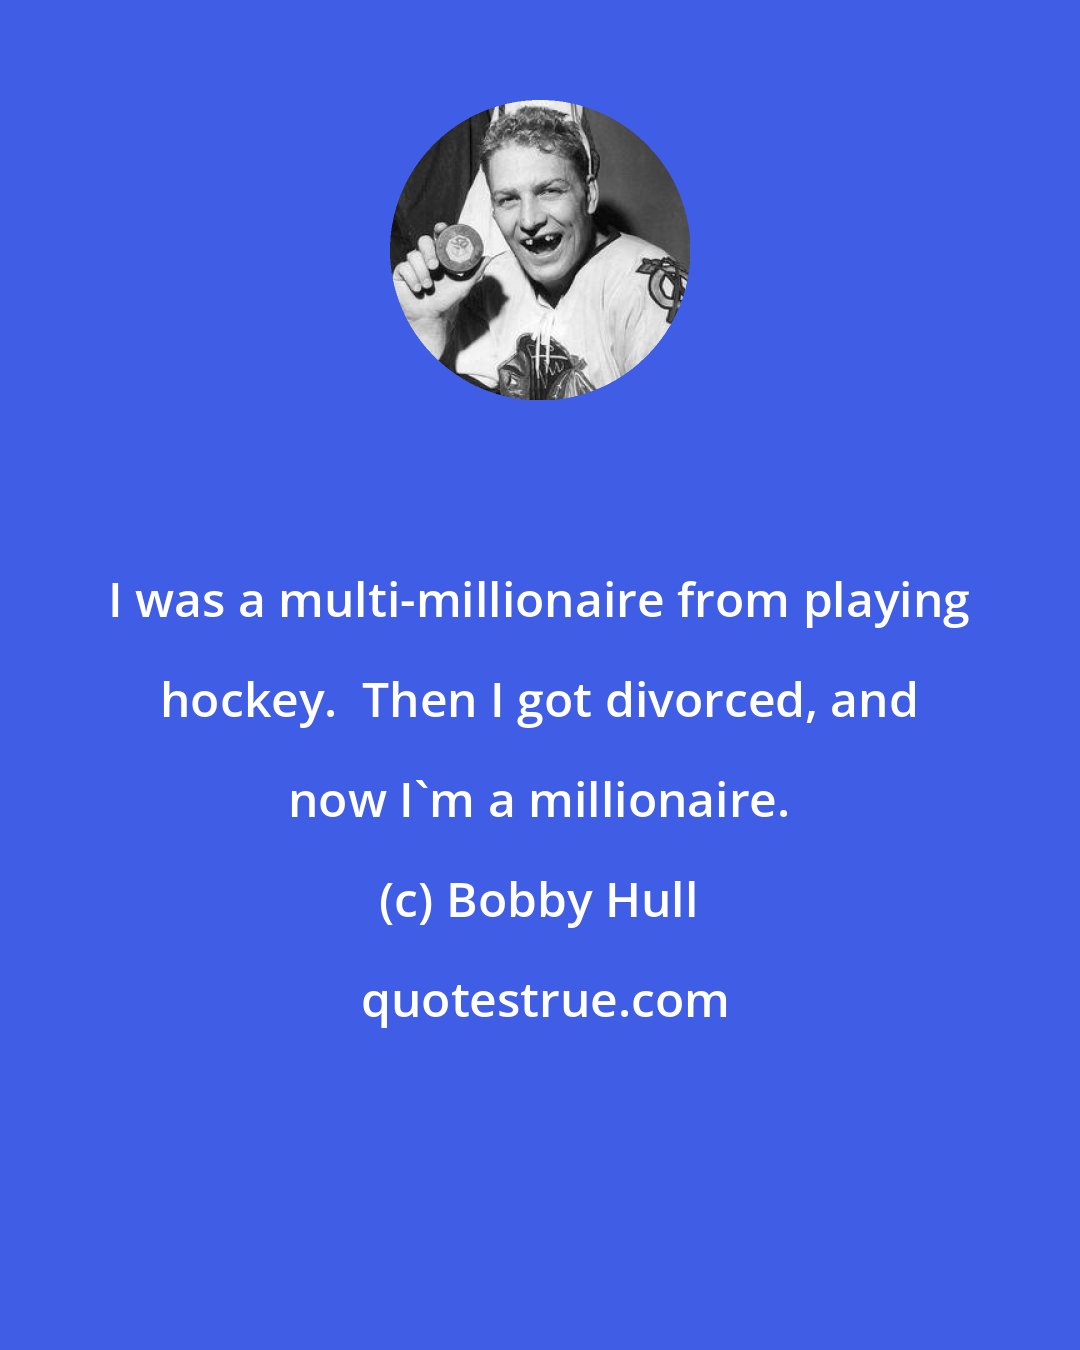 Bobby Hull: I was a multi-millionaire from playing hockey.  Then I got divorced, and now I'm a millionaire.